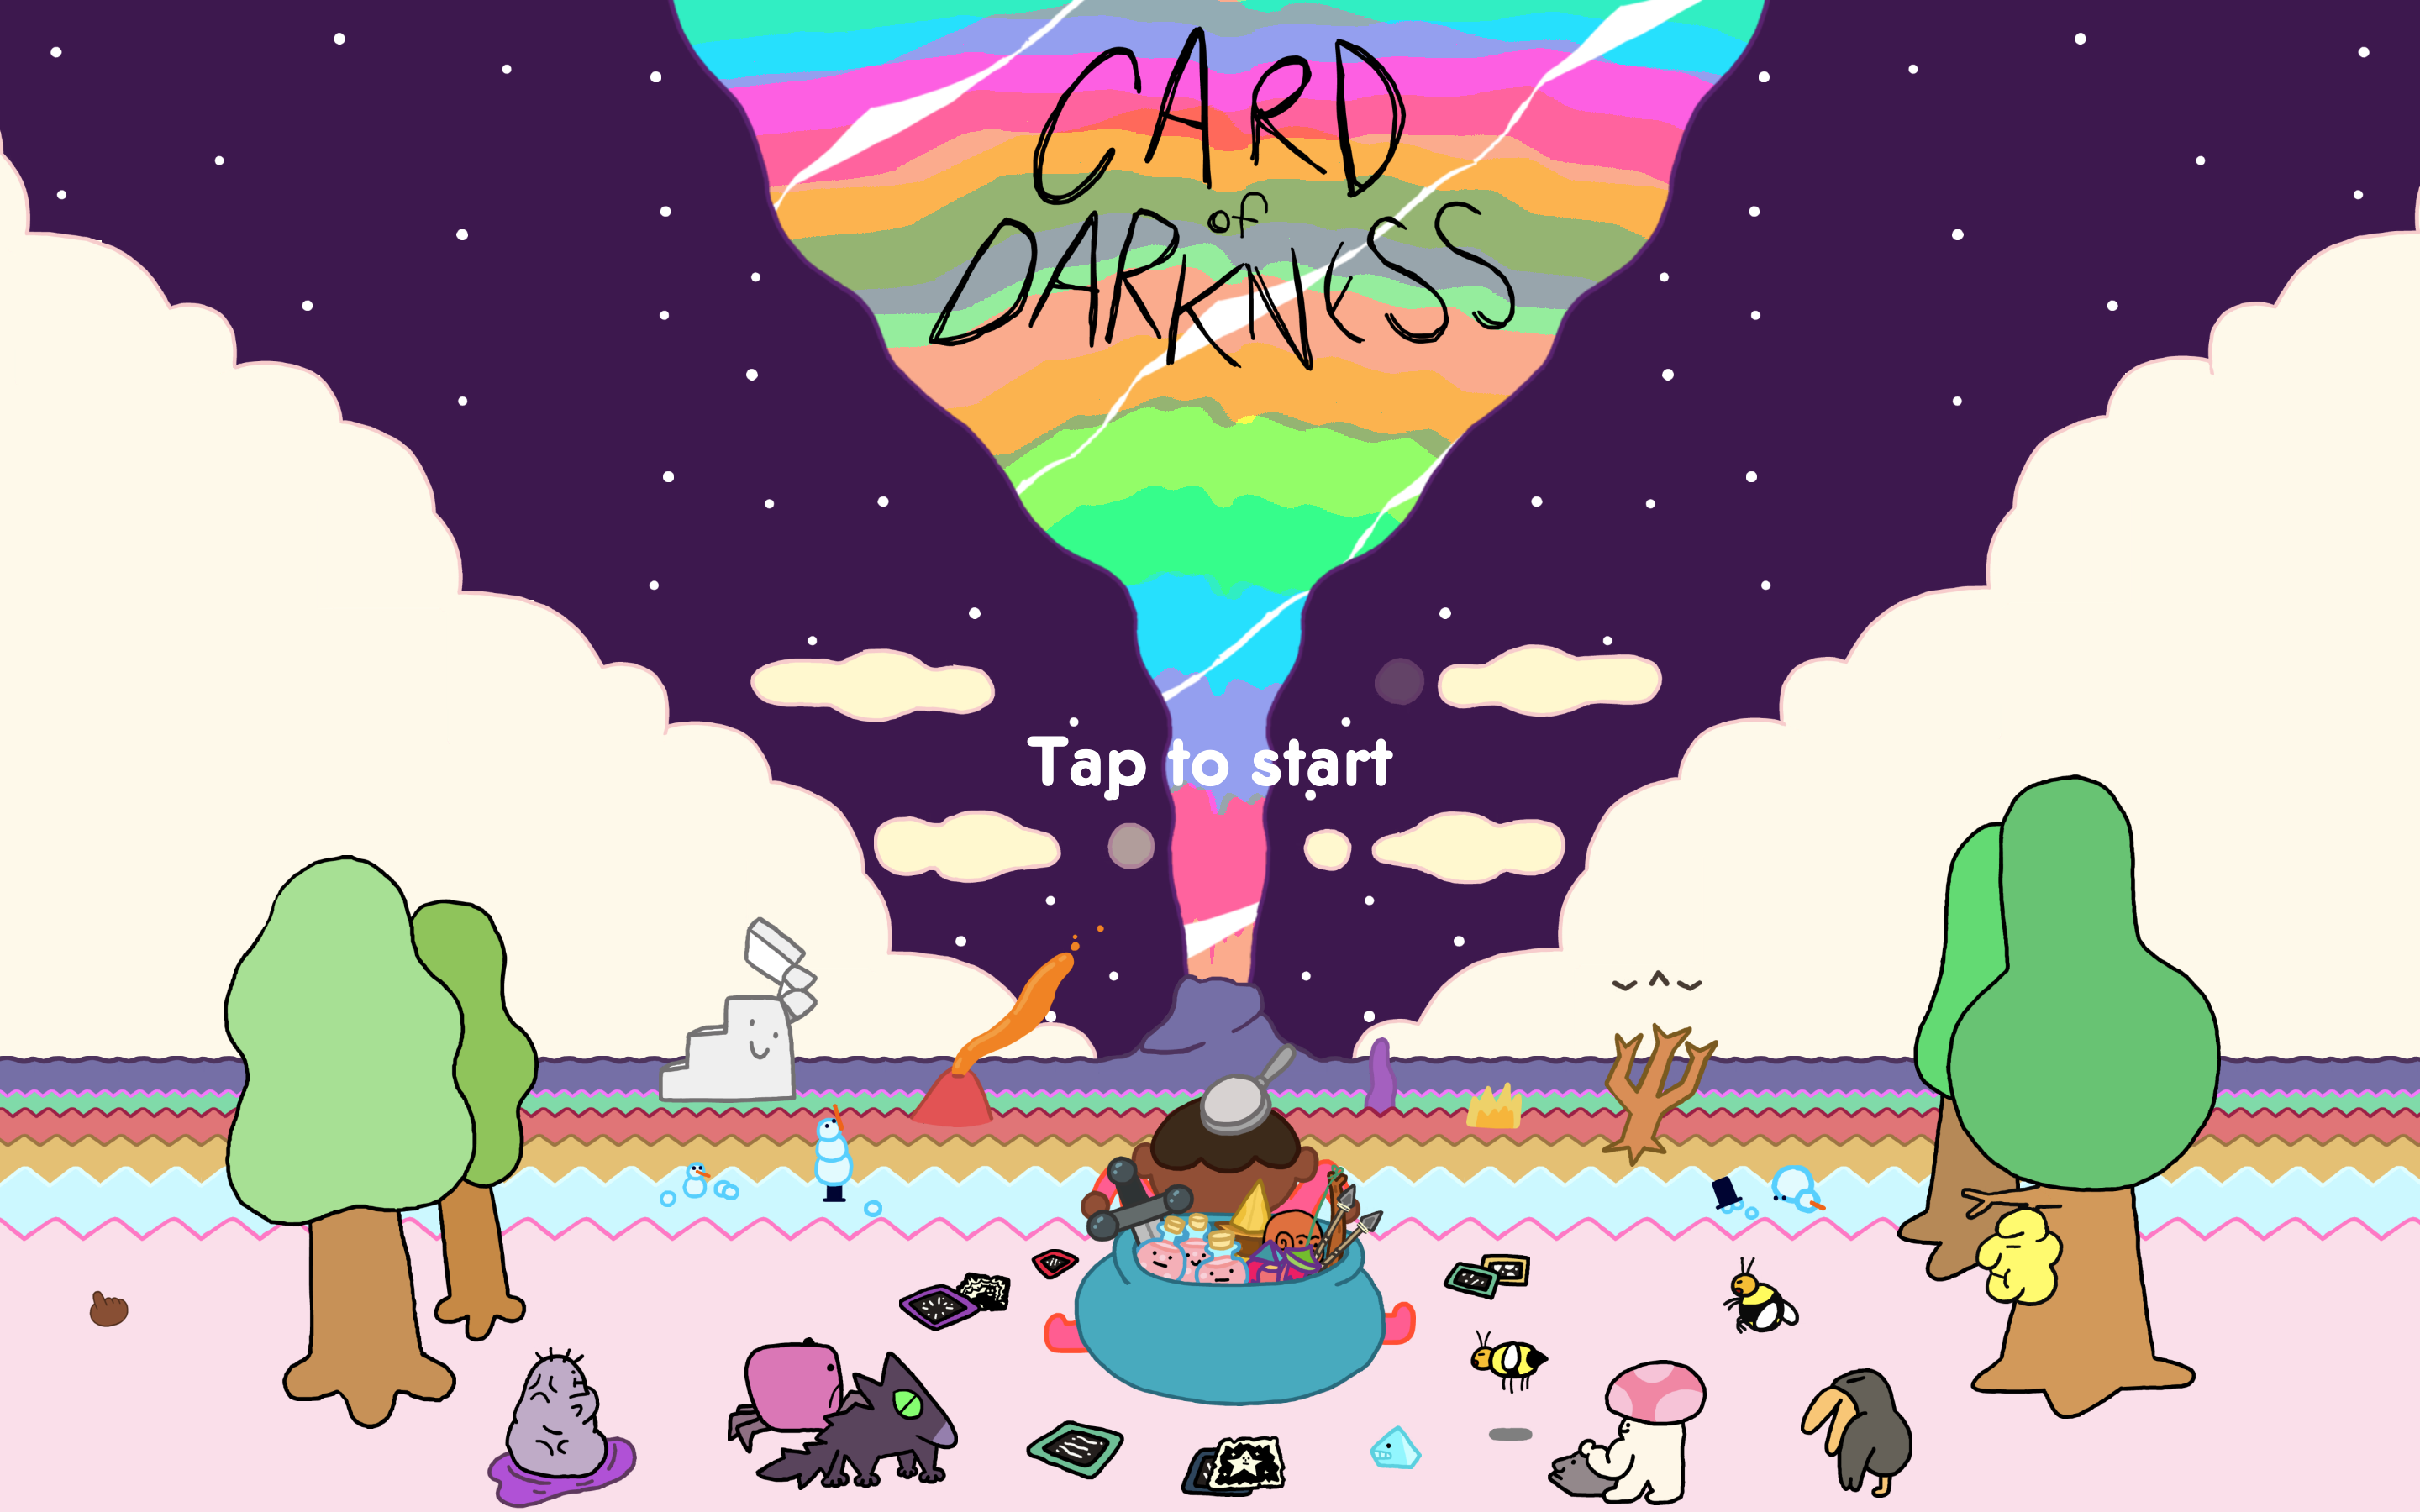 Apple Arcade: â€˜Card of Darknessâ€™ Review â€“ Like a Box of Chocolates